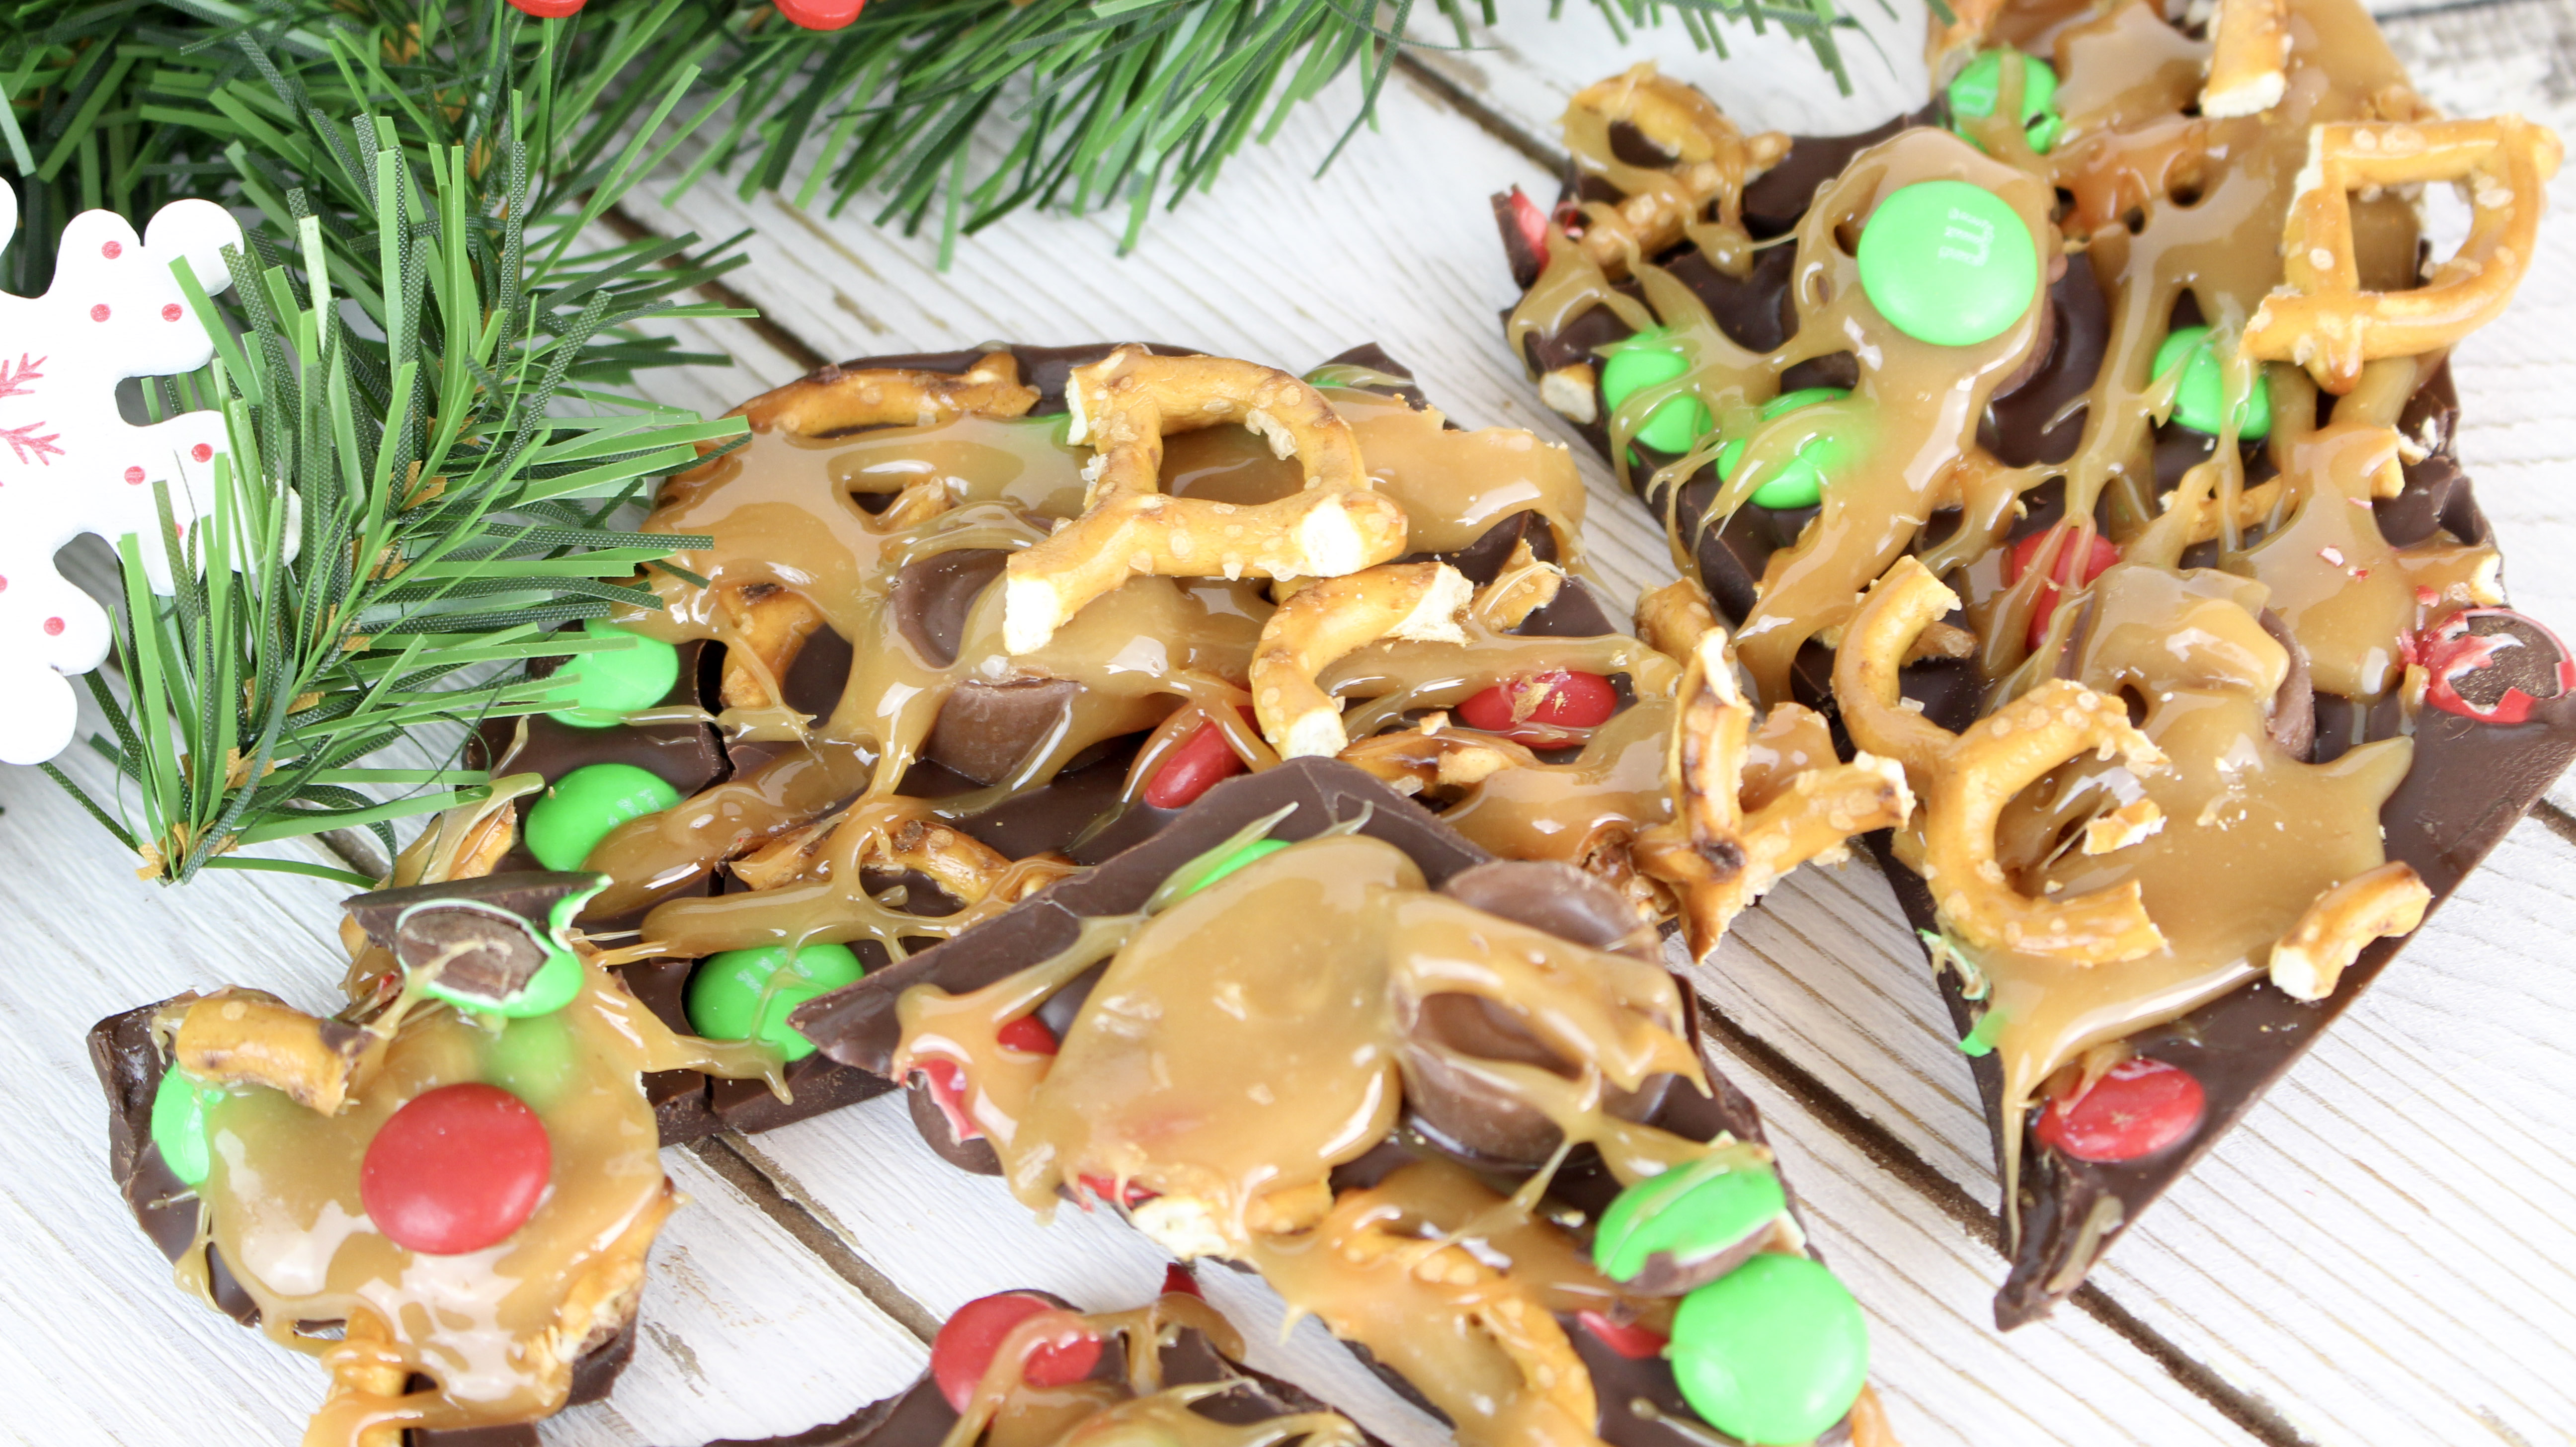 Looking for a delicious Christmas bark recipe? This chocolate bark recipe is perfect for Christmas and is covered in caramel. It is sure to be a hit.